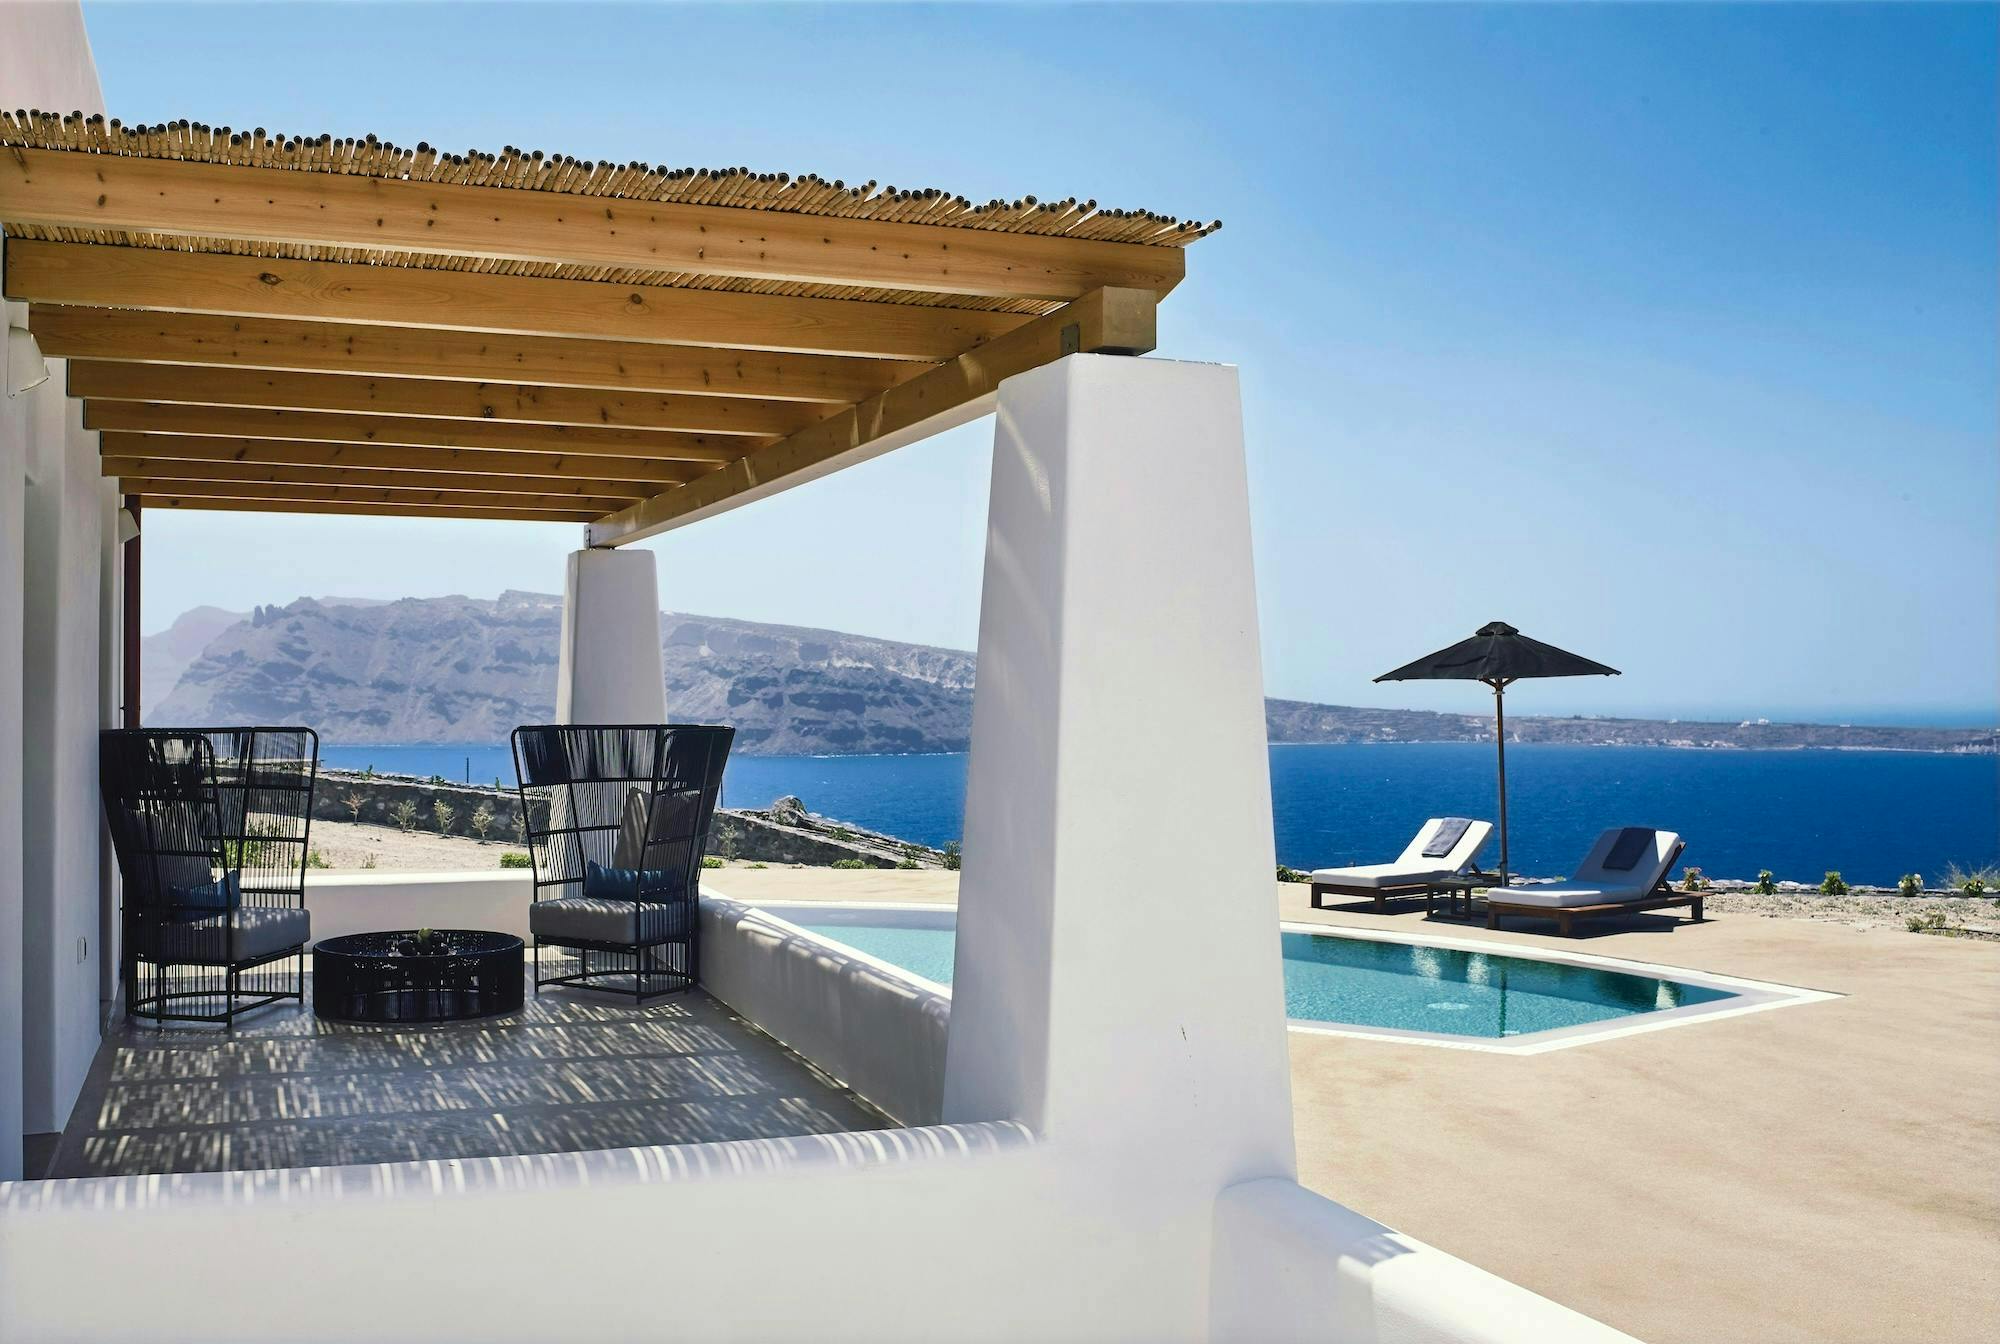 A covered porch with two chairs facing a pool and a beautiful view of the water in Santorini.